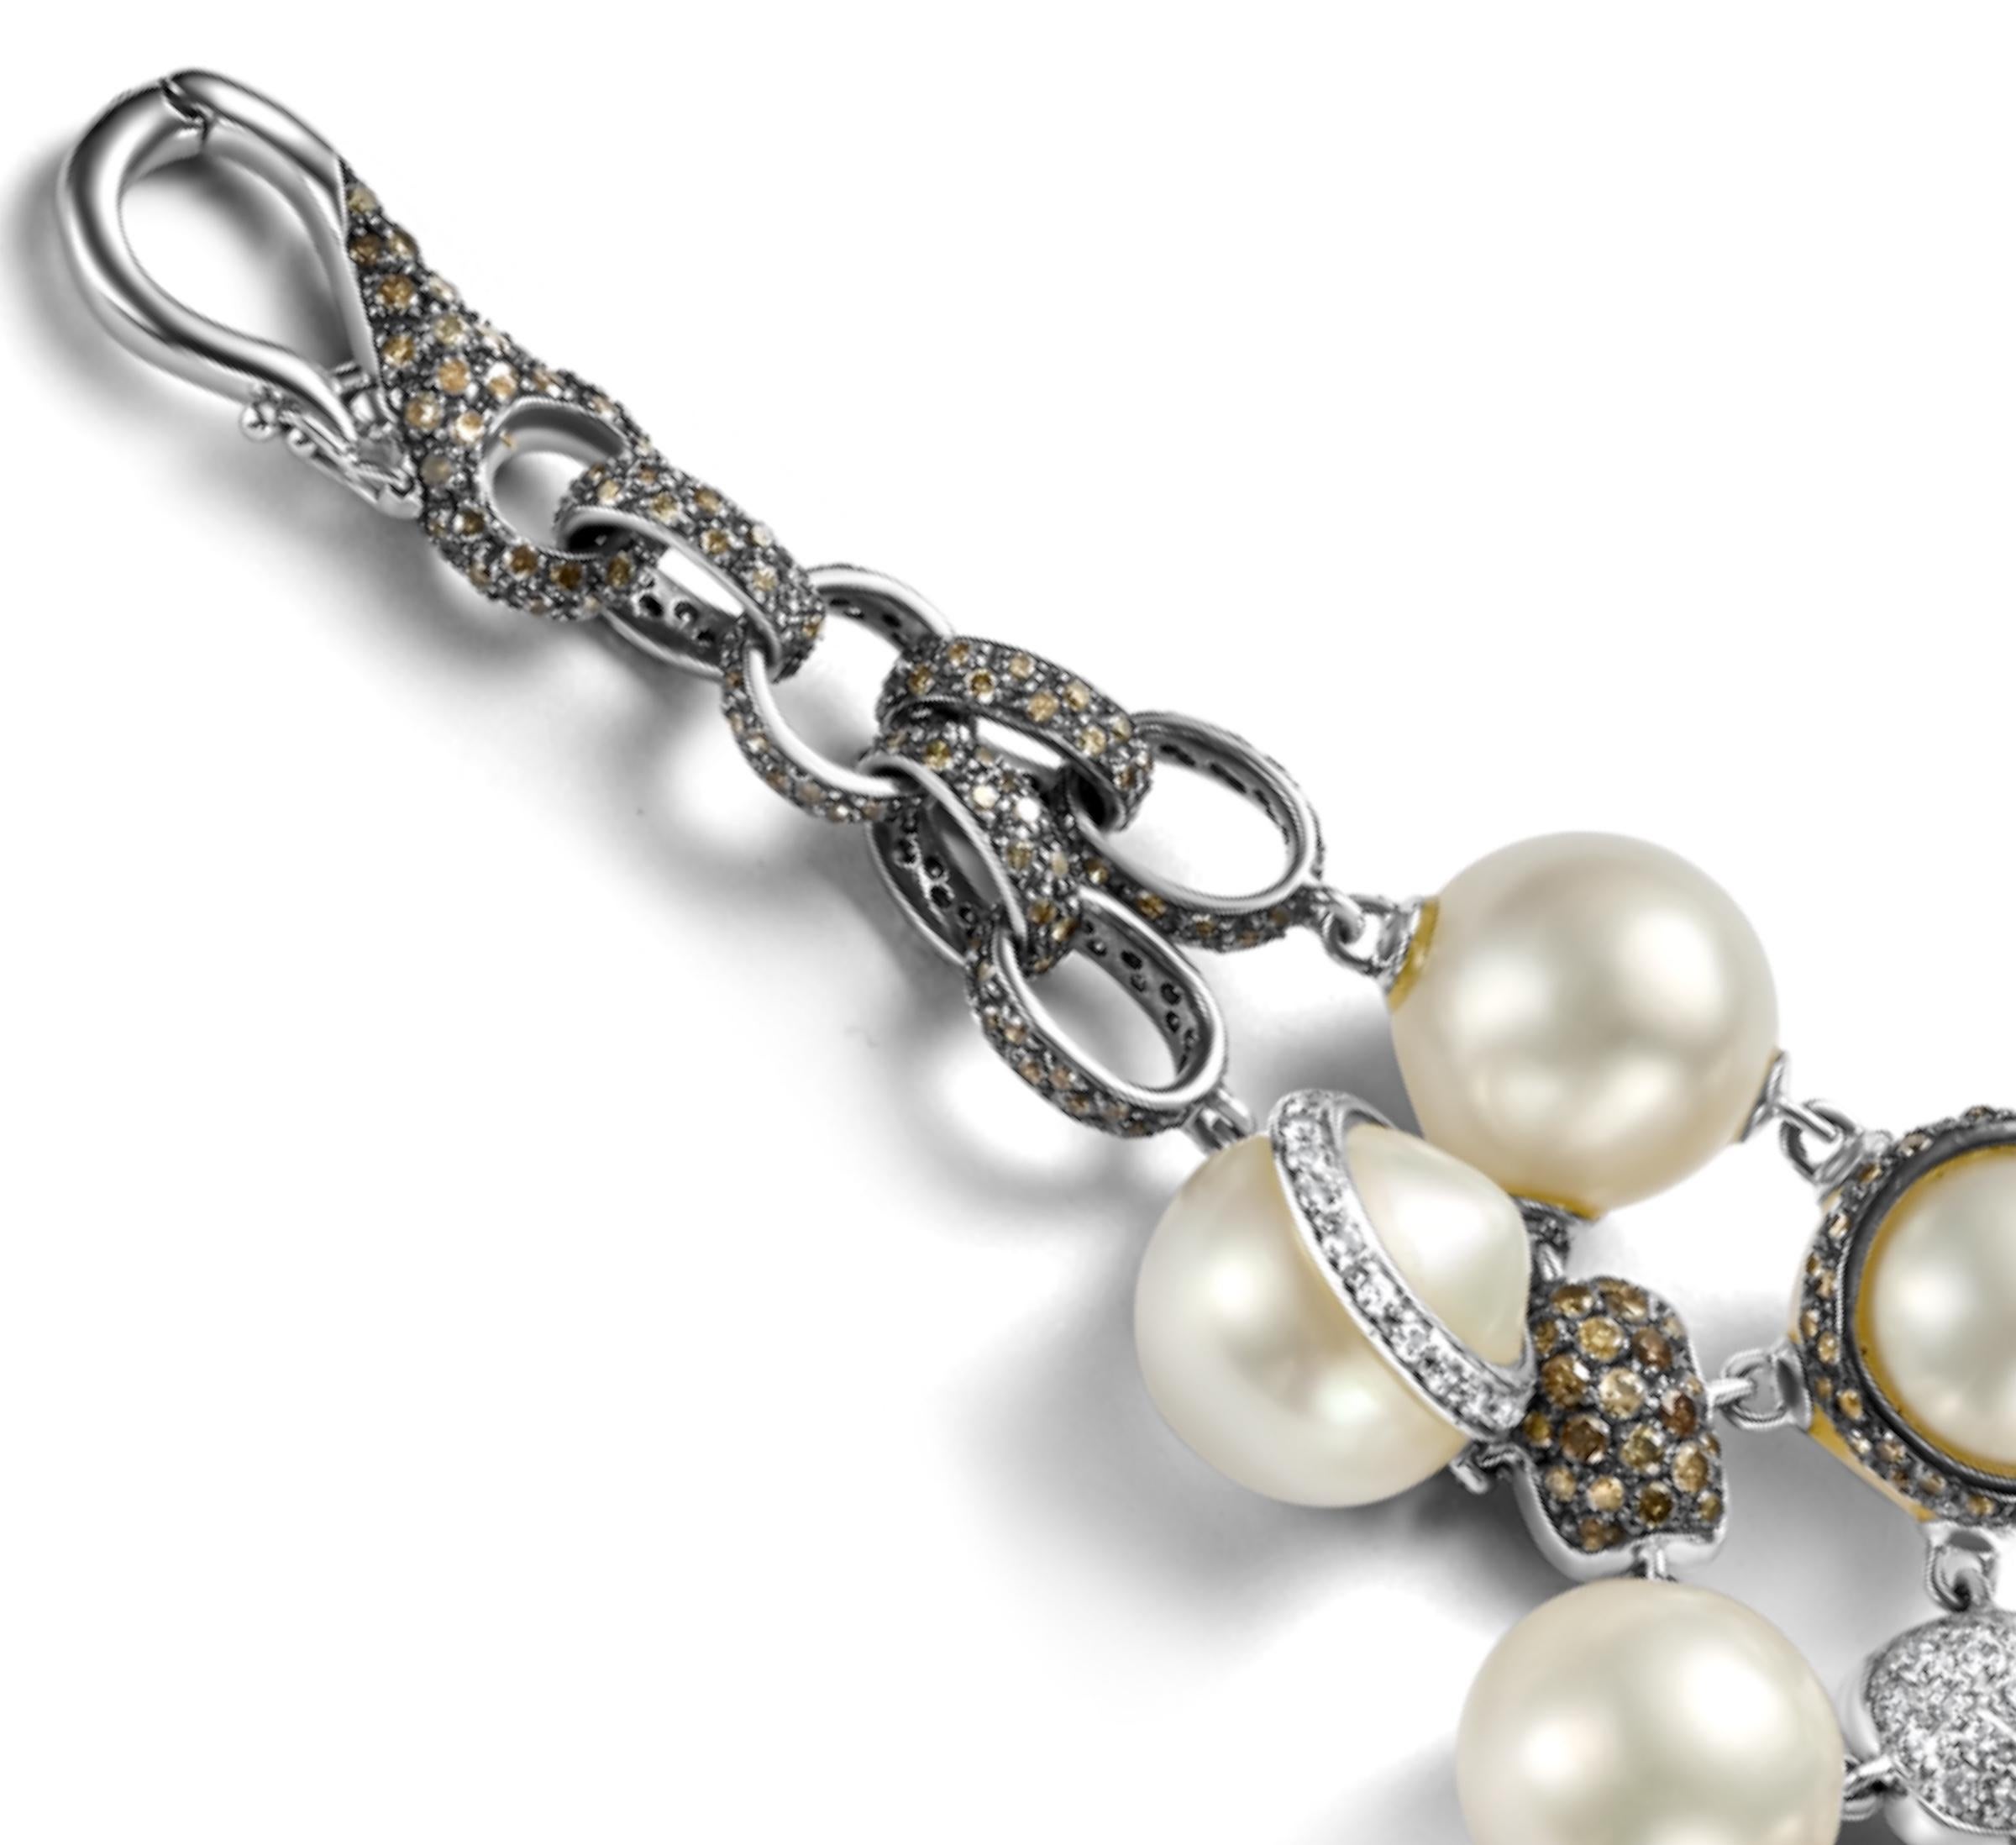 18kt White Gold Bracelet 12.6ct White & Cognac Diamonds Pearl Has Matching Ring For Sale 3